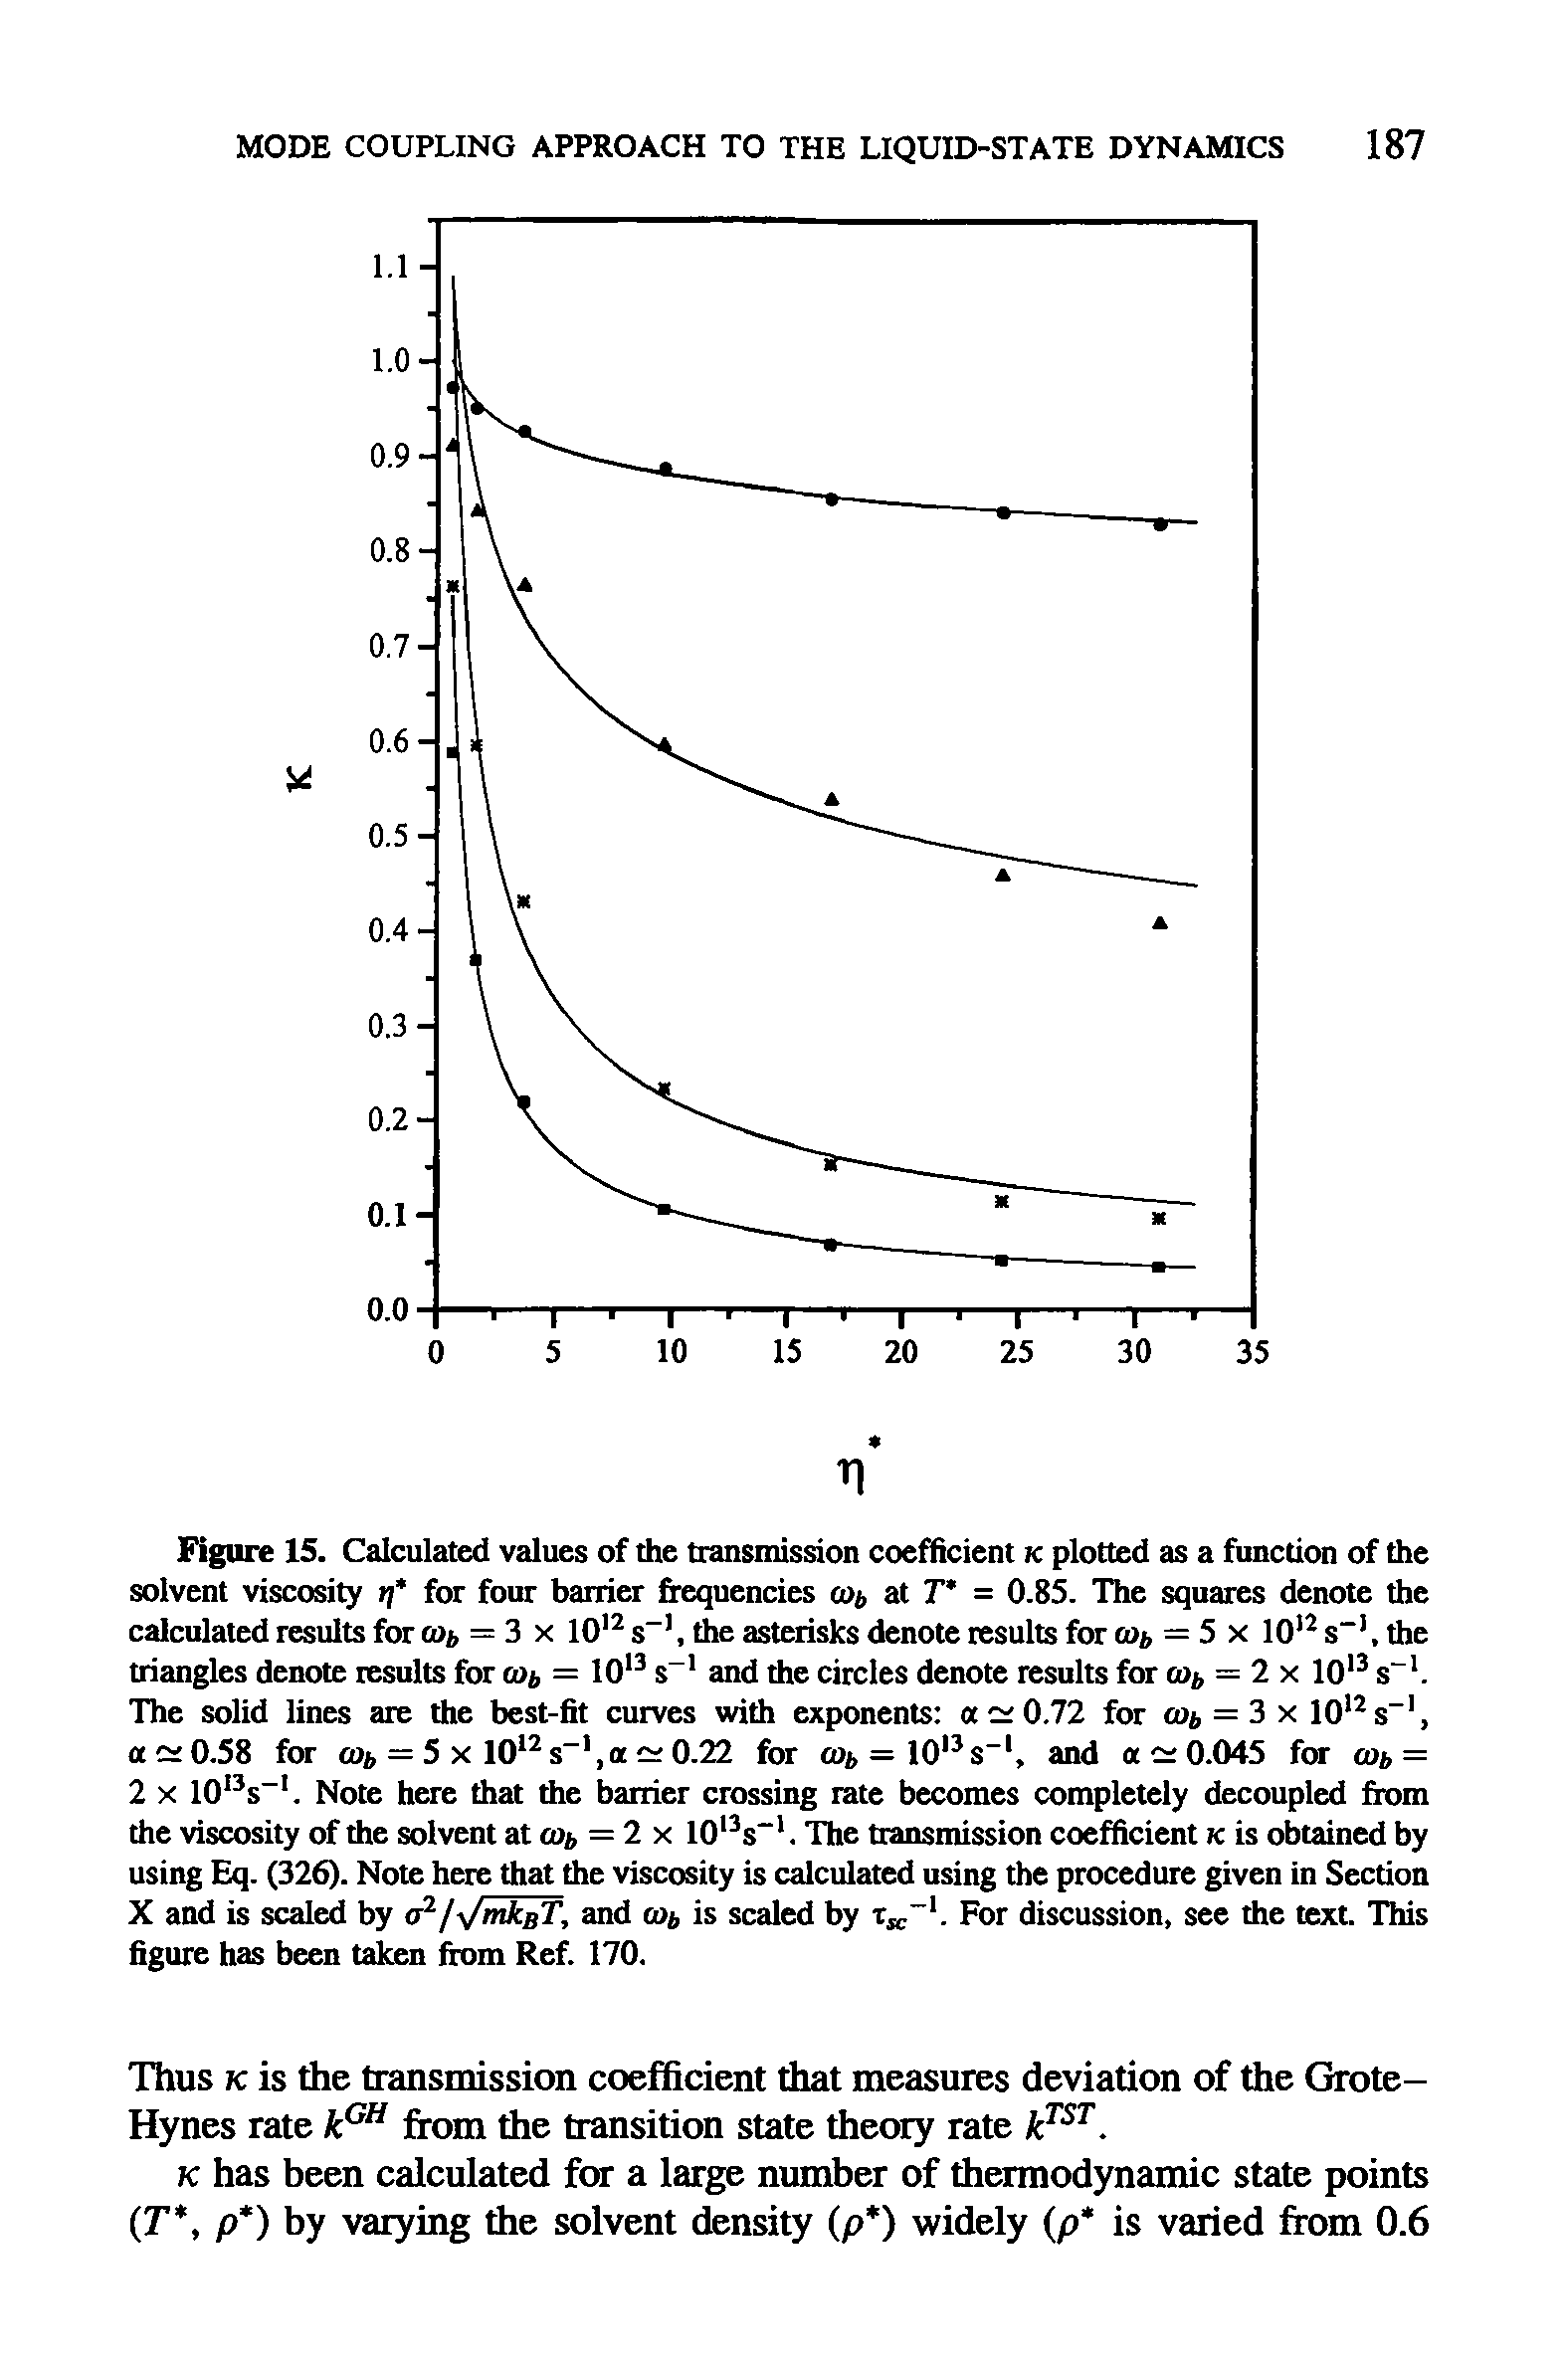 Figure 15. Calculated values of the transmission coefficient k plotted as a function of the solvent viscosity rf for four barrier frequencies a>b at 7 = 0.85. The squares denote the calculated results for to = 3 x 1012 s I, the asterisks denote results for to = 5 x 1012 s-1, the triangles denote results for to = 1013 s I and the circles denote results for a>b = 2 x 1013 s l. The solid lines are the best-fit curves with exponents a 0.72 for wb = 3 x 1012s l, a 0.58 for wb = 5 x 1012 s-1,a 0.22 for wb = 1013 s l, and a 0.045 for cob = 2 x 10I3s-. Note here that the barrier crossing rate becomes completely decoupled from the viscosity of the solvent at wb = 2 x 10l3s-1. The transmission coefficient k is obtained by using Eq. (326). Note here that the viscosity is calculated using the procedure given in Section X and is scaled by a2/ /mkBT, and a>b is scaled by t -1. For discussion, see the text. This figure has been taken from Ref. 170.